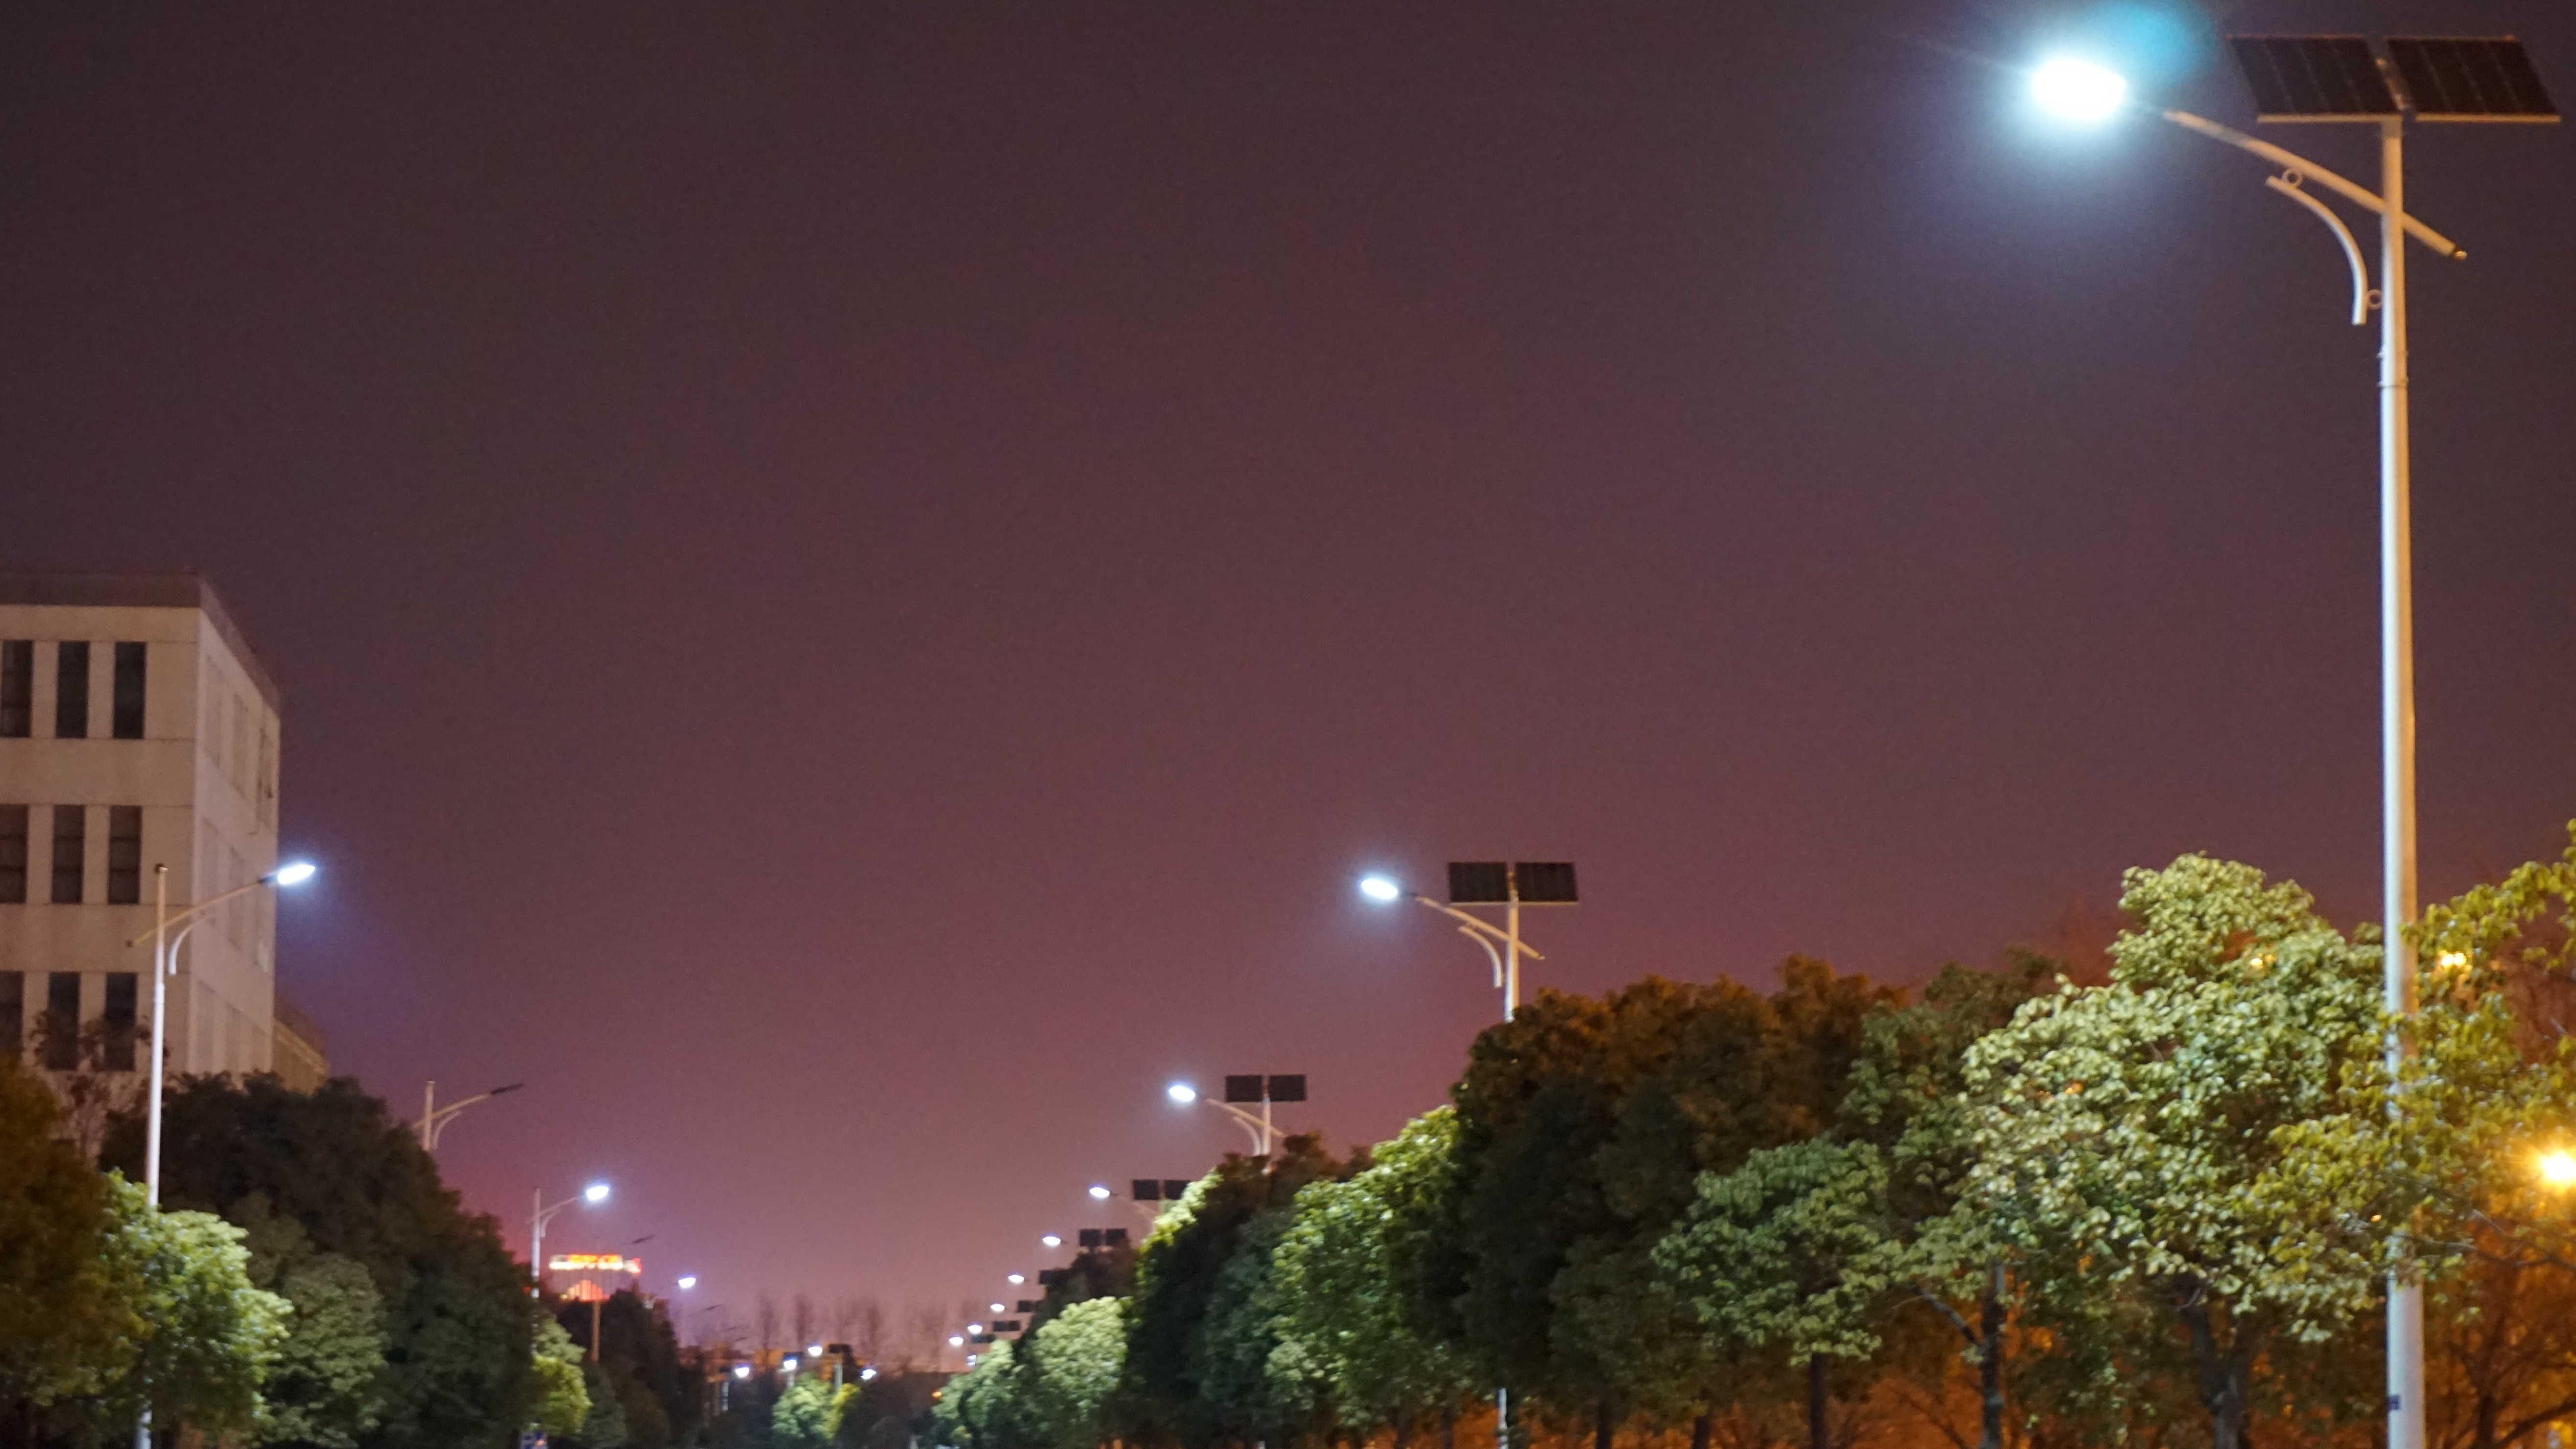 How to Calculate the Optimal Height & Spacing Layout for LED Solar Street Light?